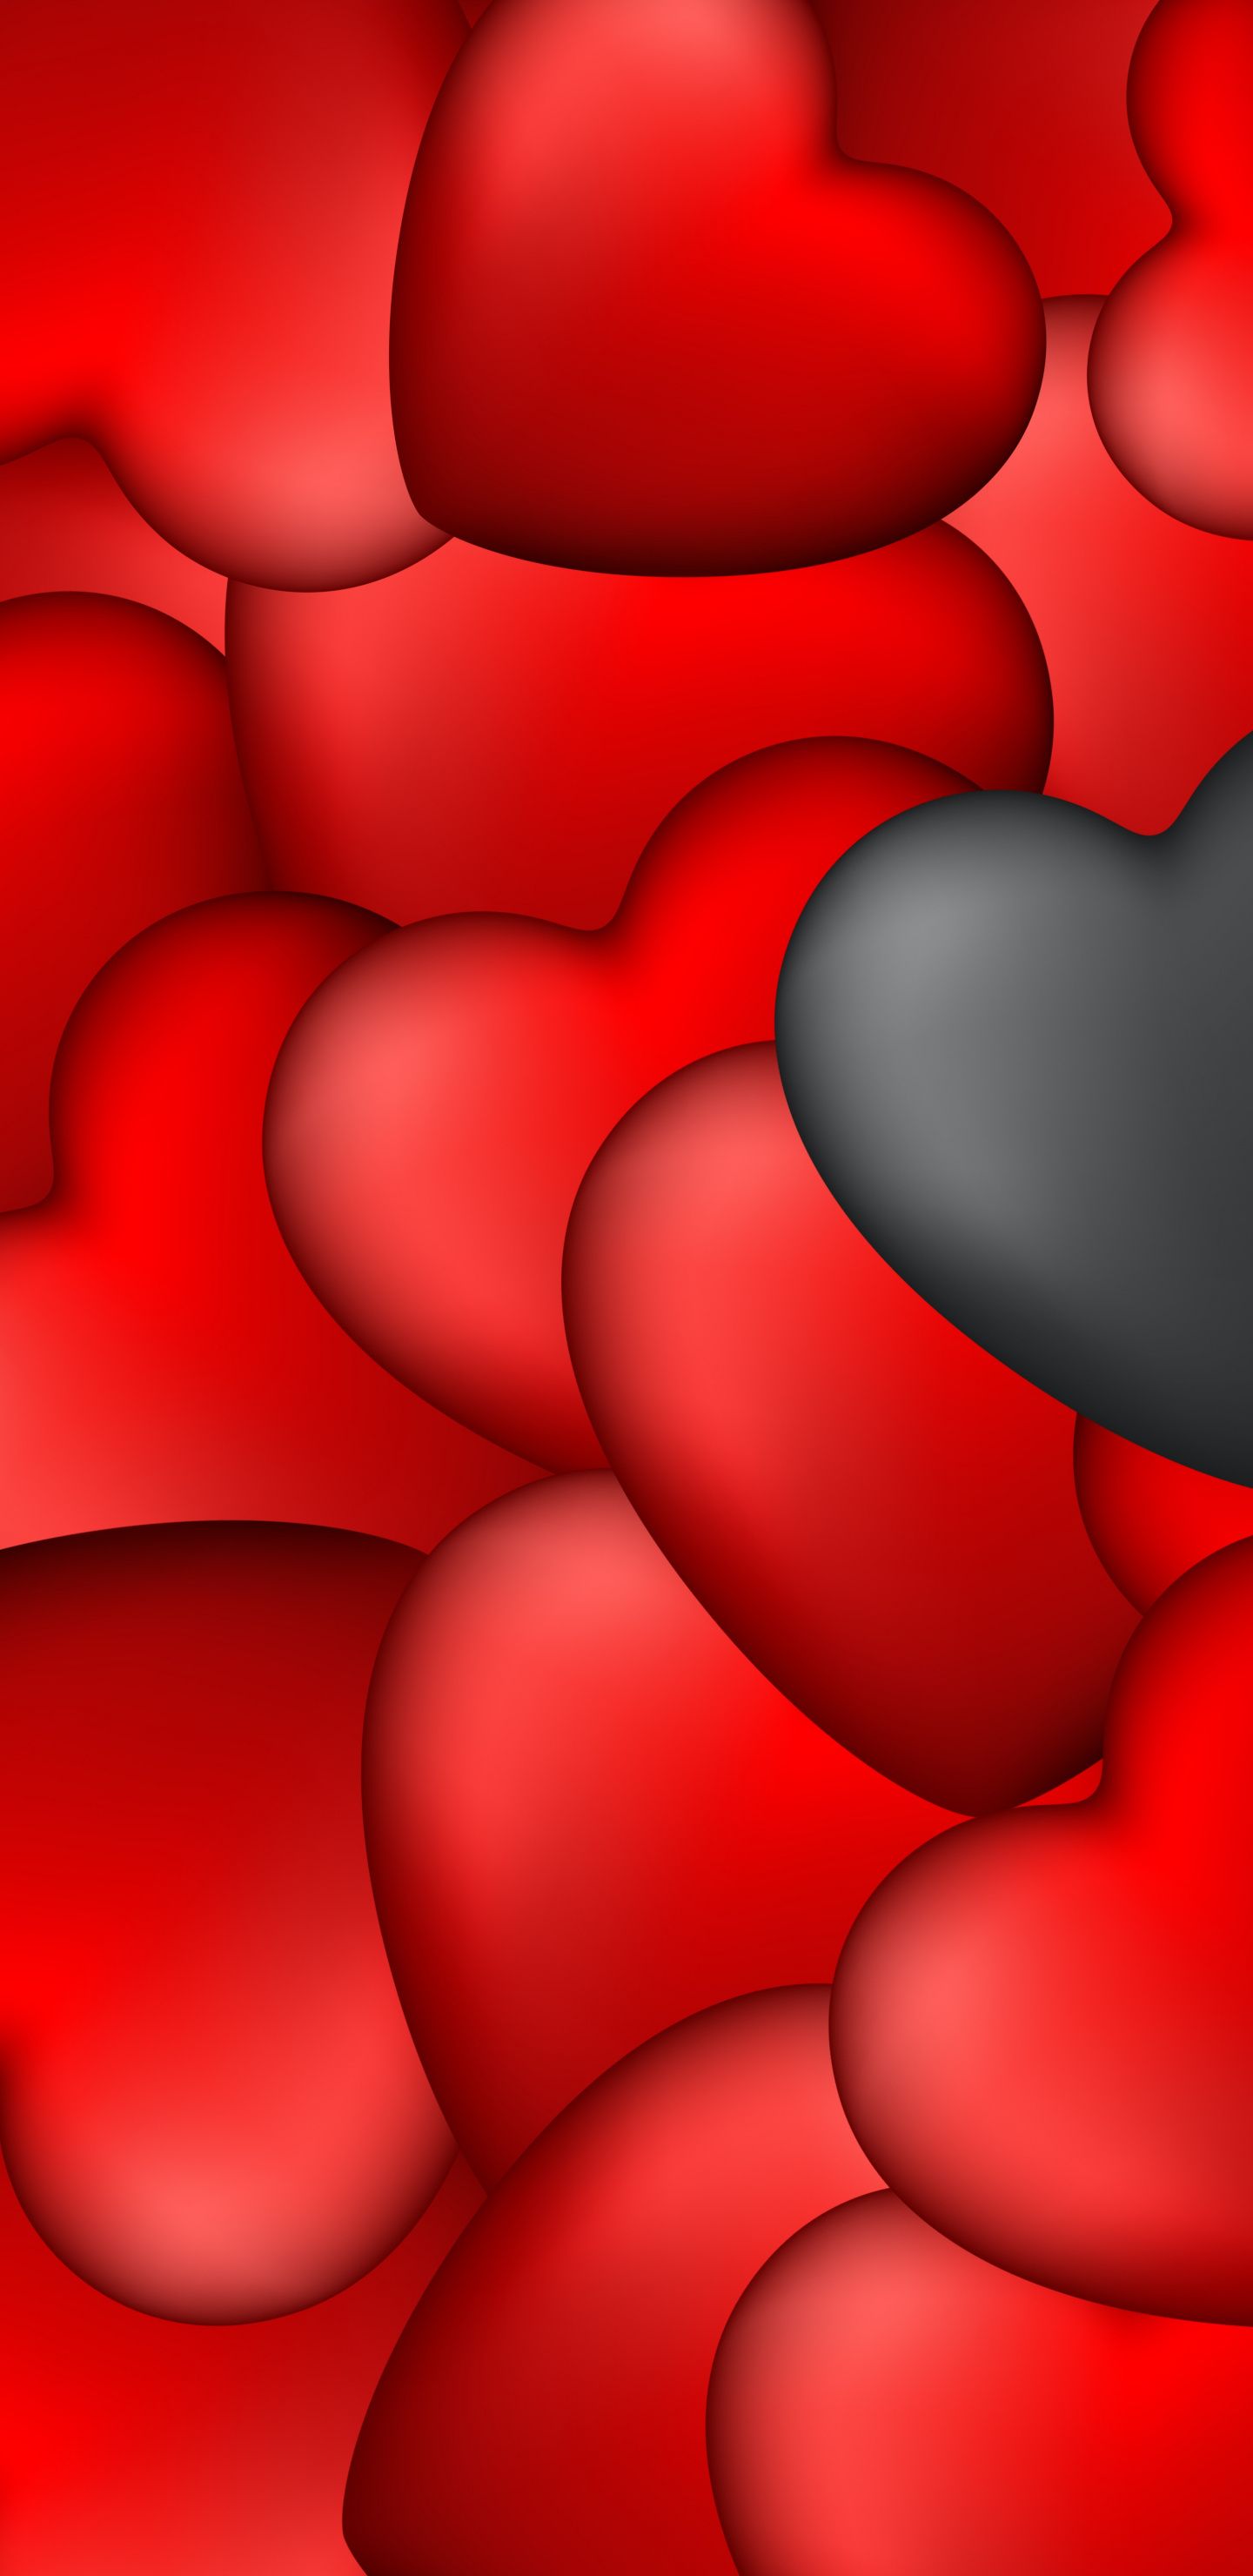 Red Heart In Black Background HD Black Aesthetic Wallpapers  HD Wallpapers   ID 45554